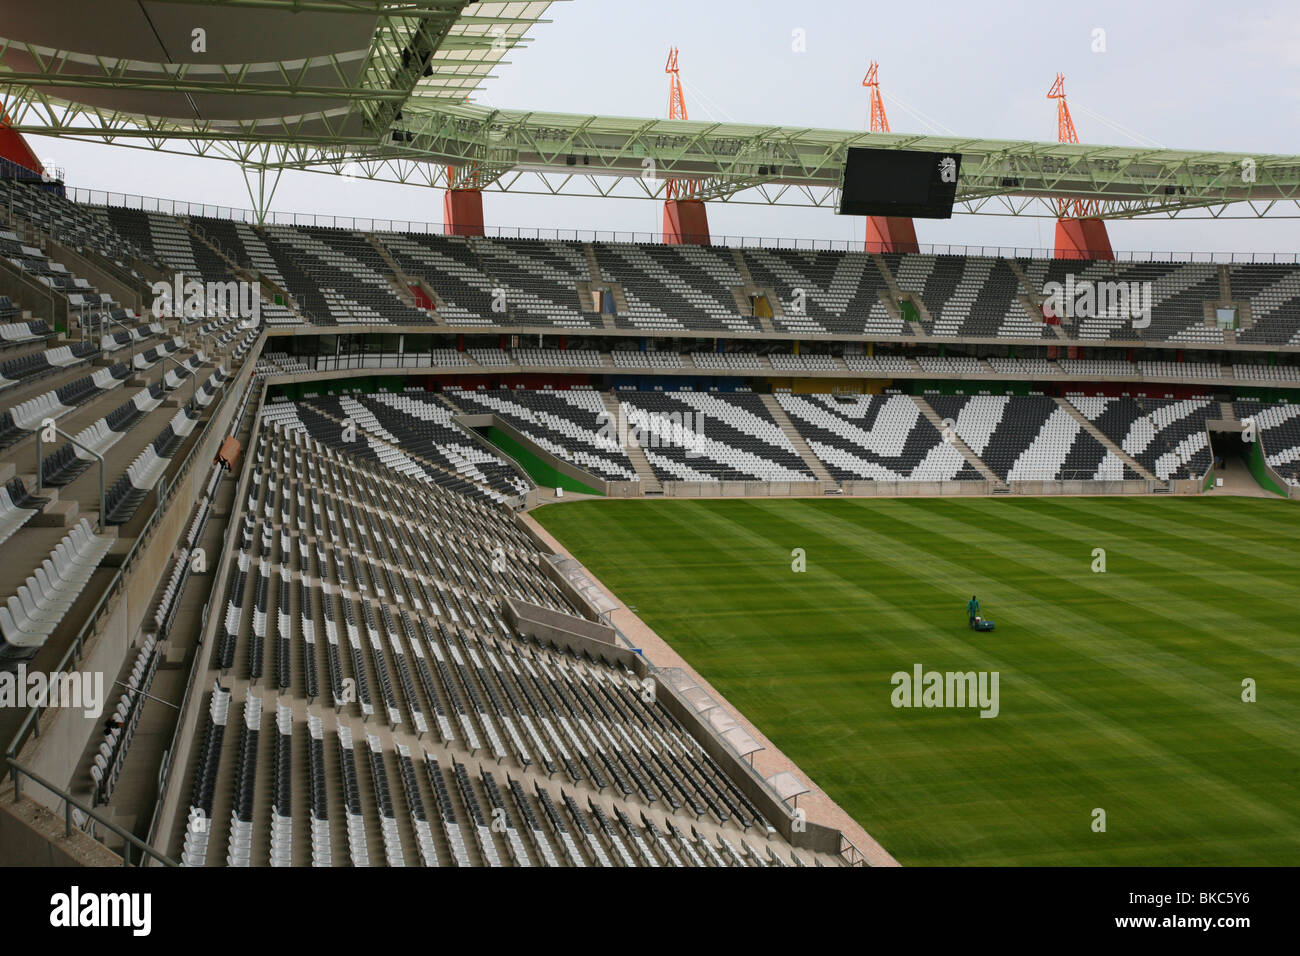 Interior of the Mbombela stadium In Nelspruit  at dusk showing the zebra-striped seating an a lush, green, playing surface Stock Photo